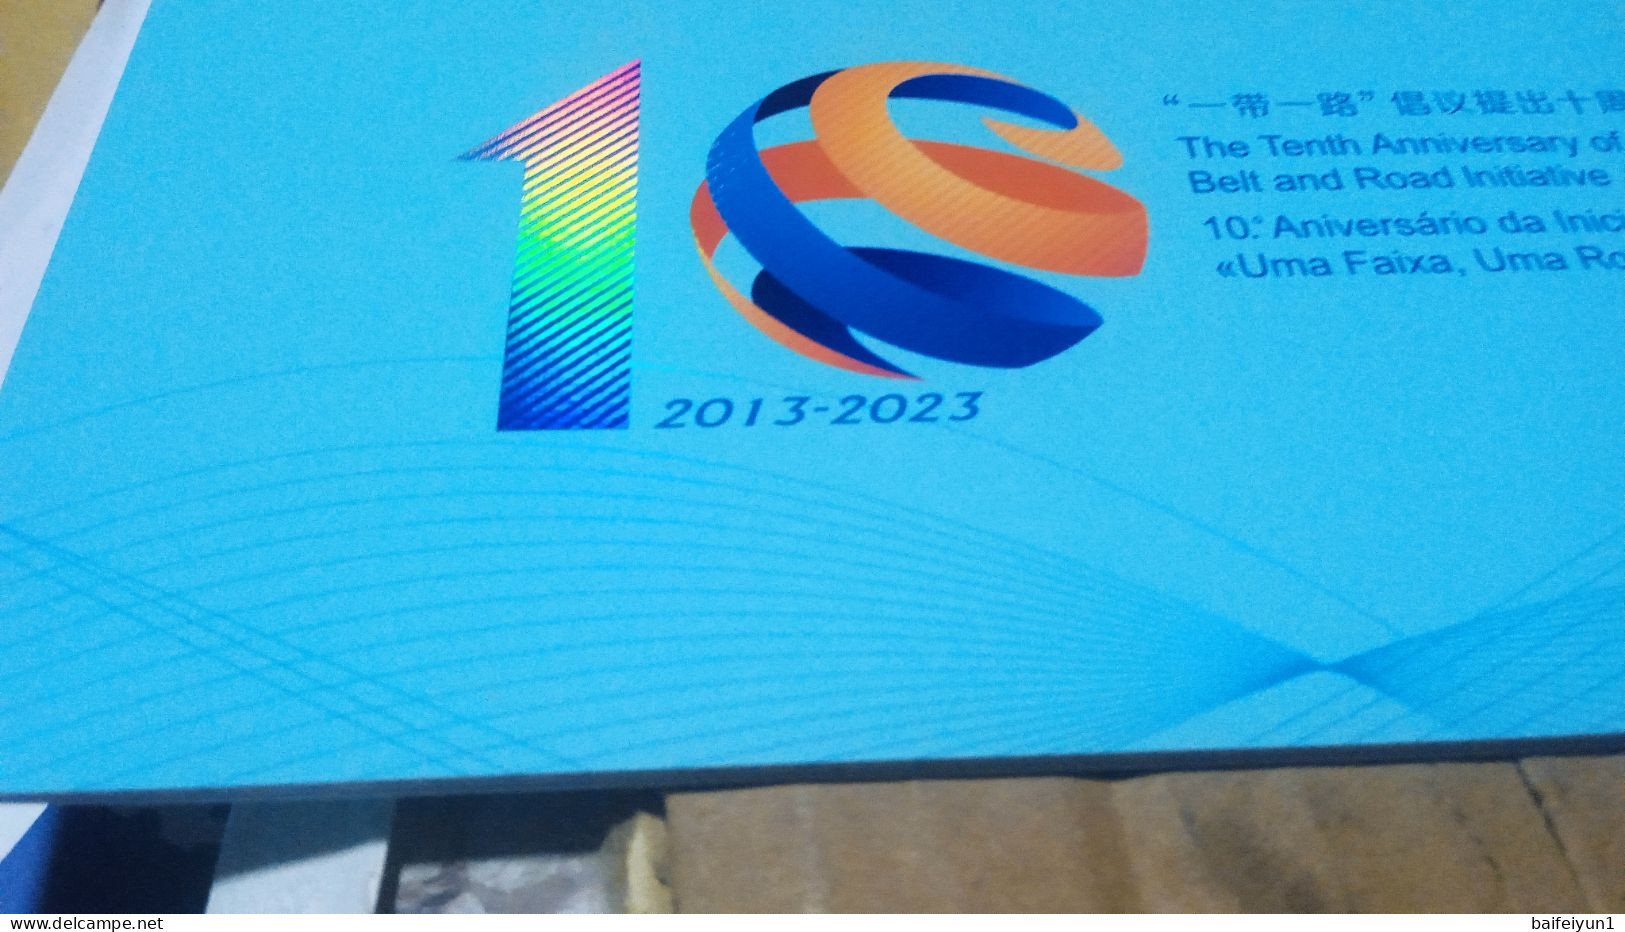 China 2023-17 The10th Anniversary of one belt and one road Initiative joint issued with Hong kong Macau booklet hologram